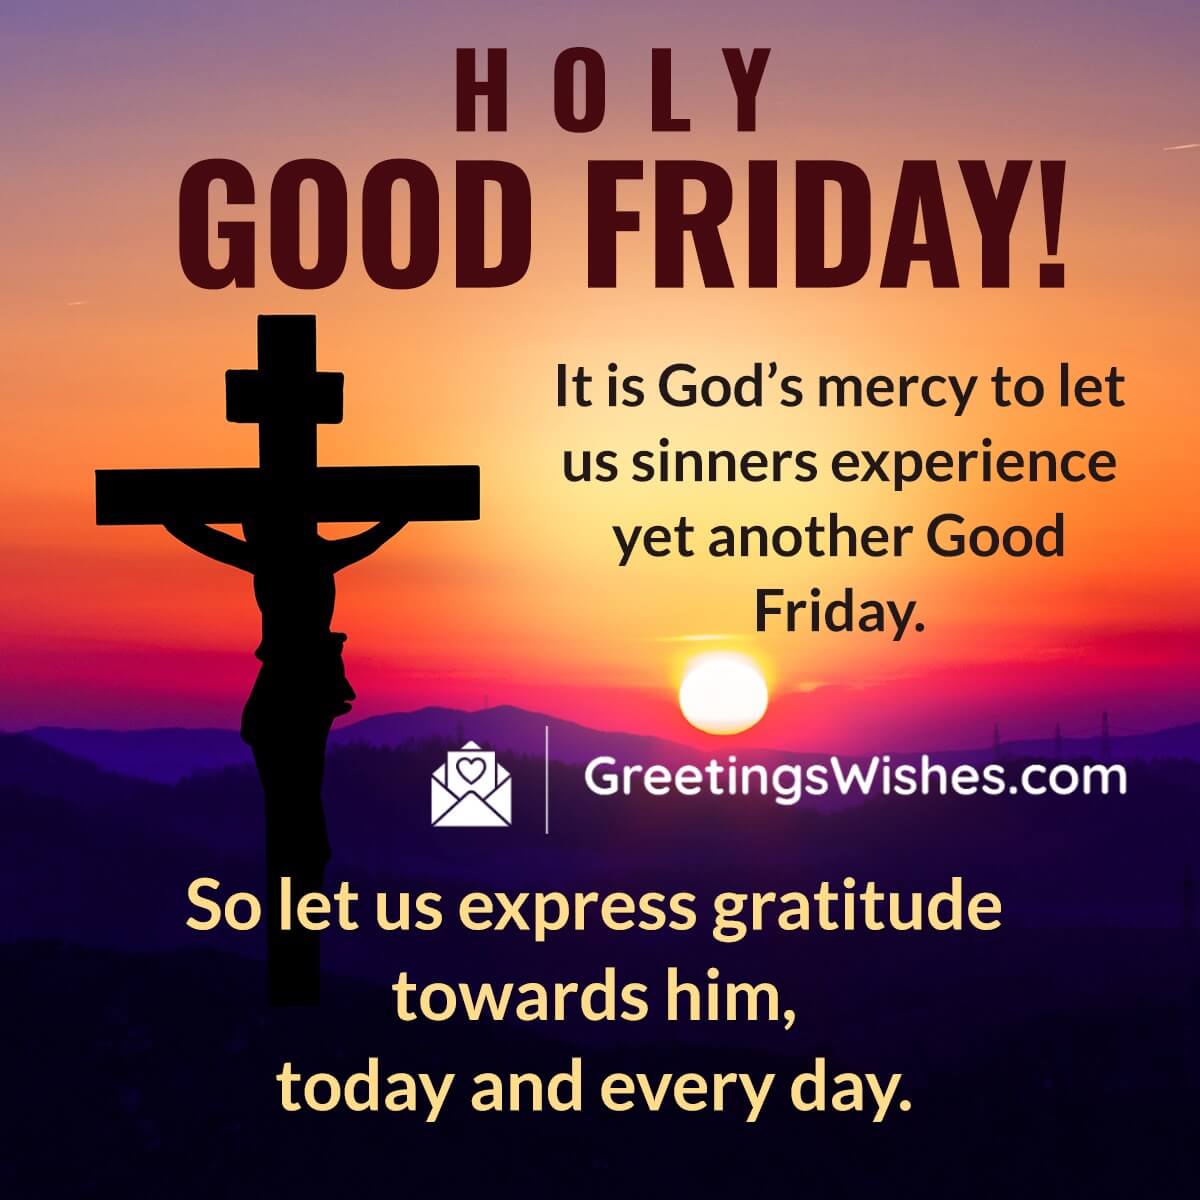 Good Friday Wishes ( 07 April ) - Greetings Wishes